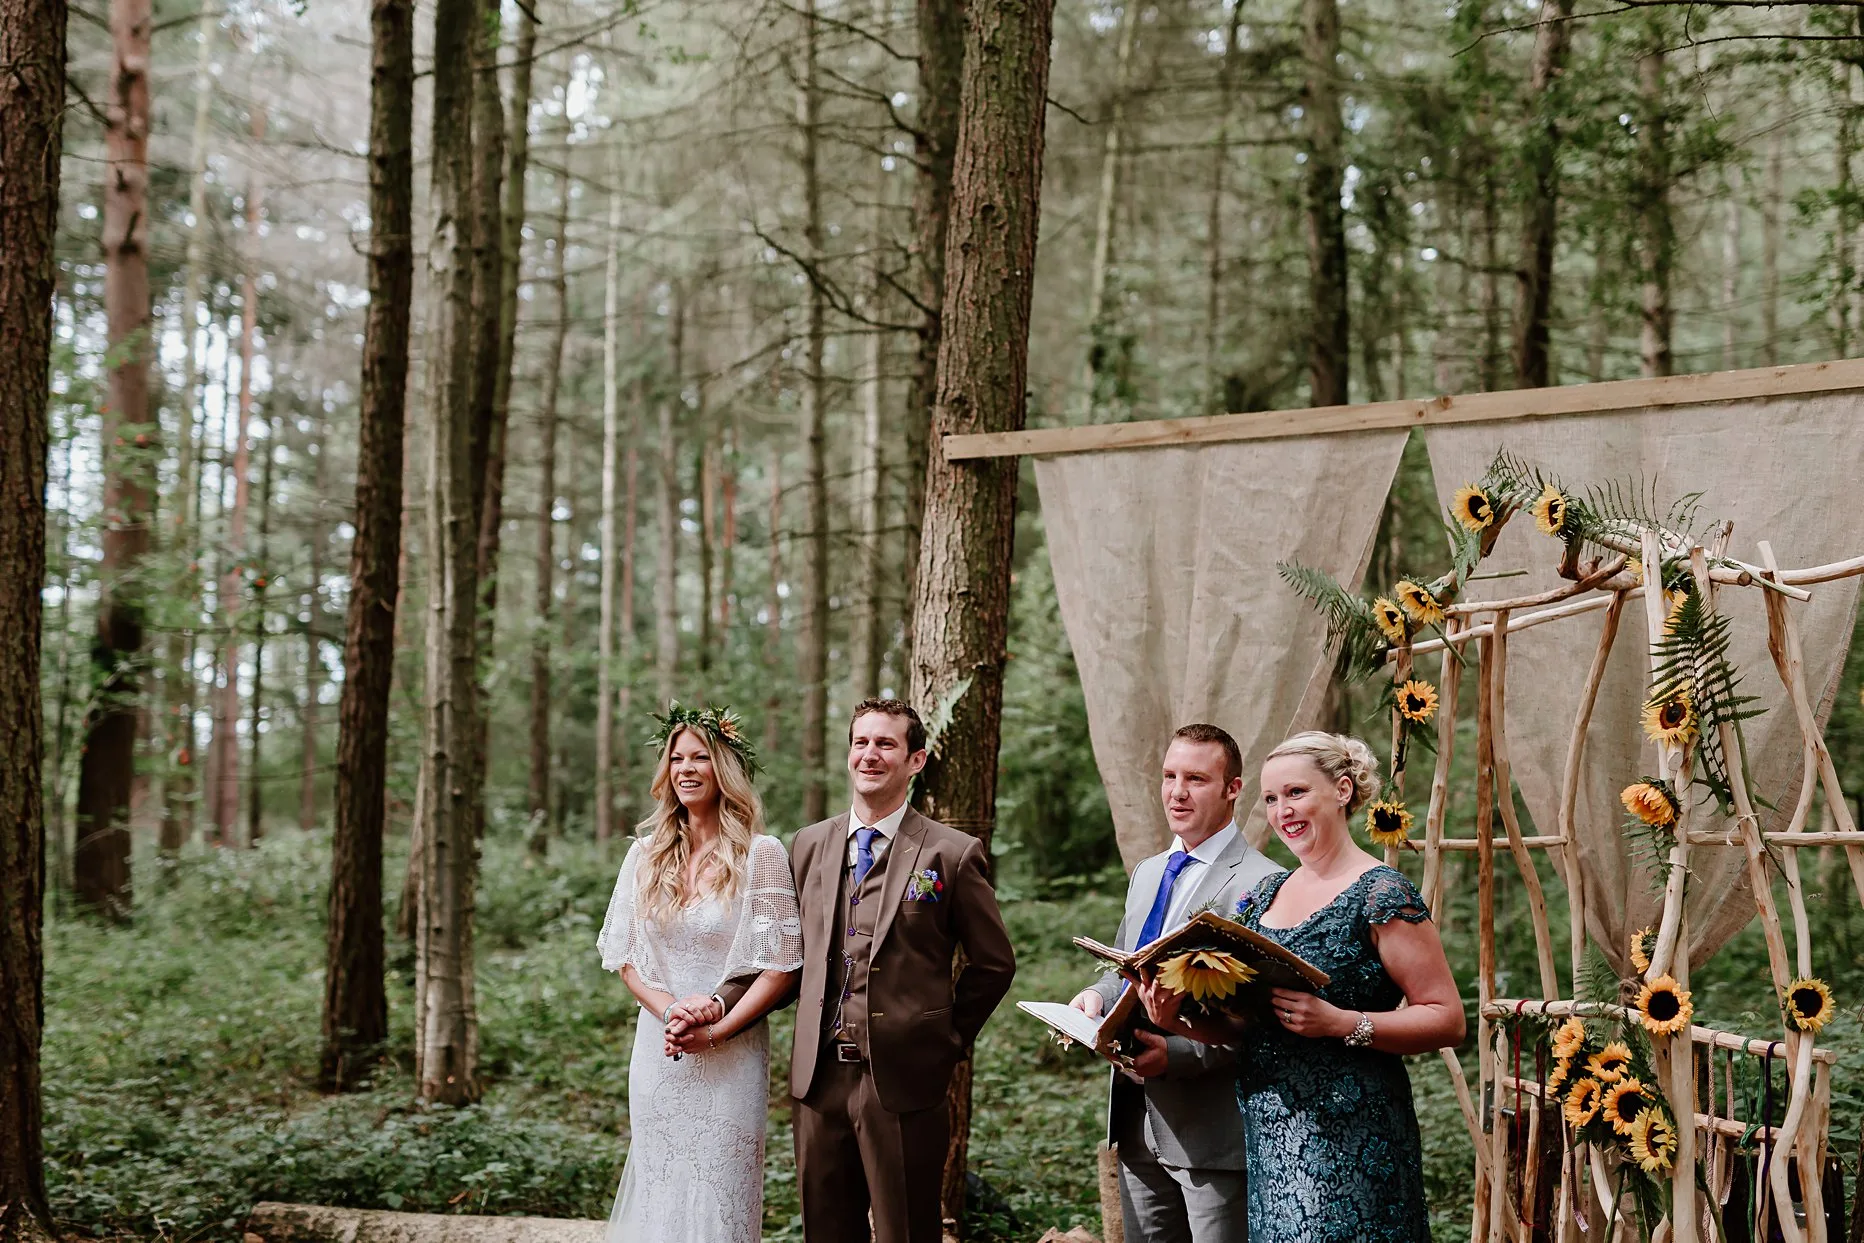 Bride and groom stand with two celebrants during their wedding ceremony in the woods at Camp Katur. They are stood next to a archway of sunflowers.